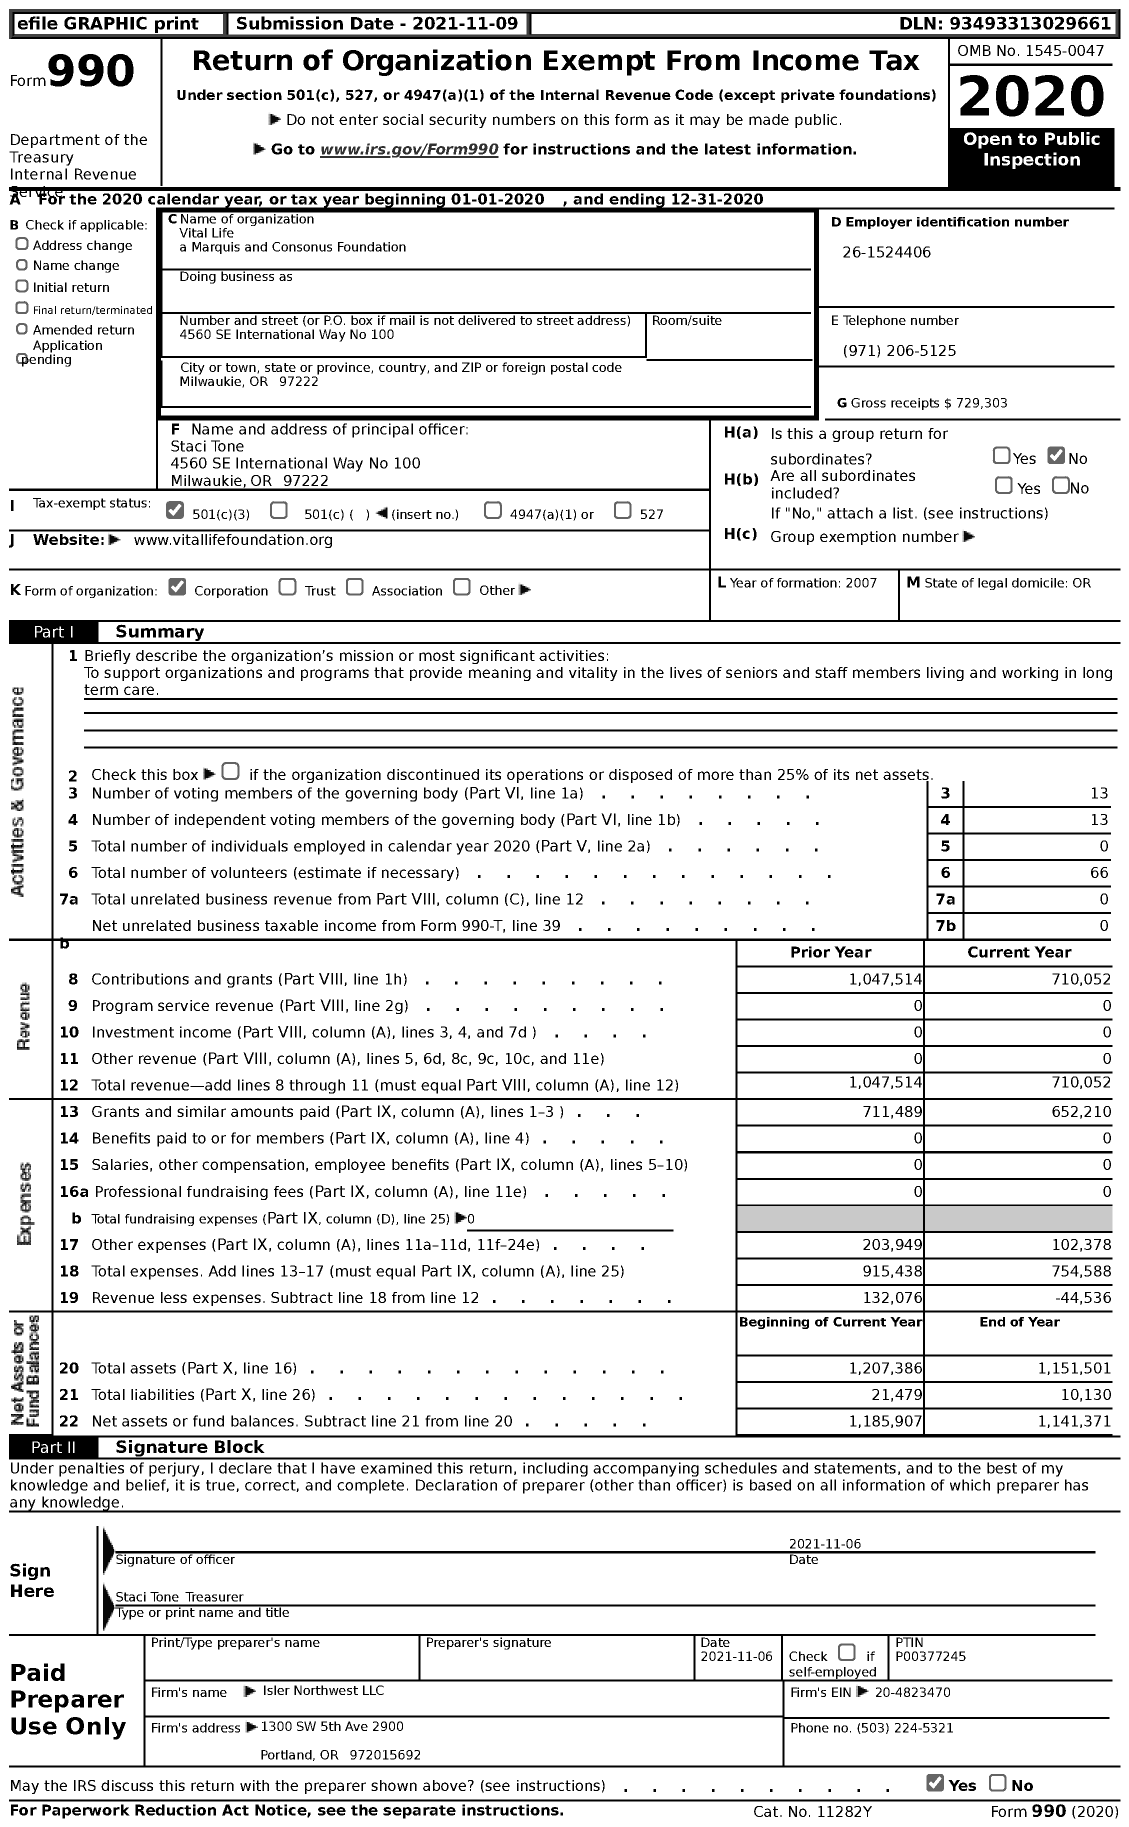 Image of first page of 2020 Form 990 for Vital Life a Marquis and Consonus Foundation